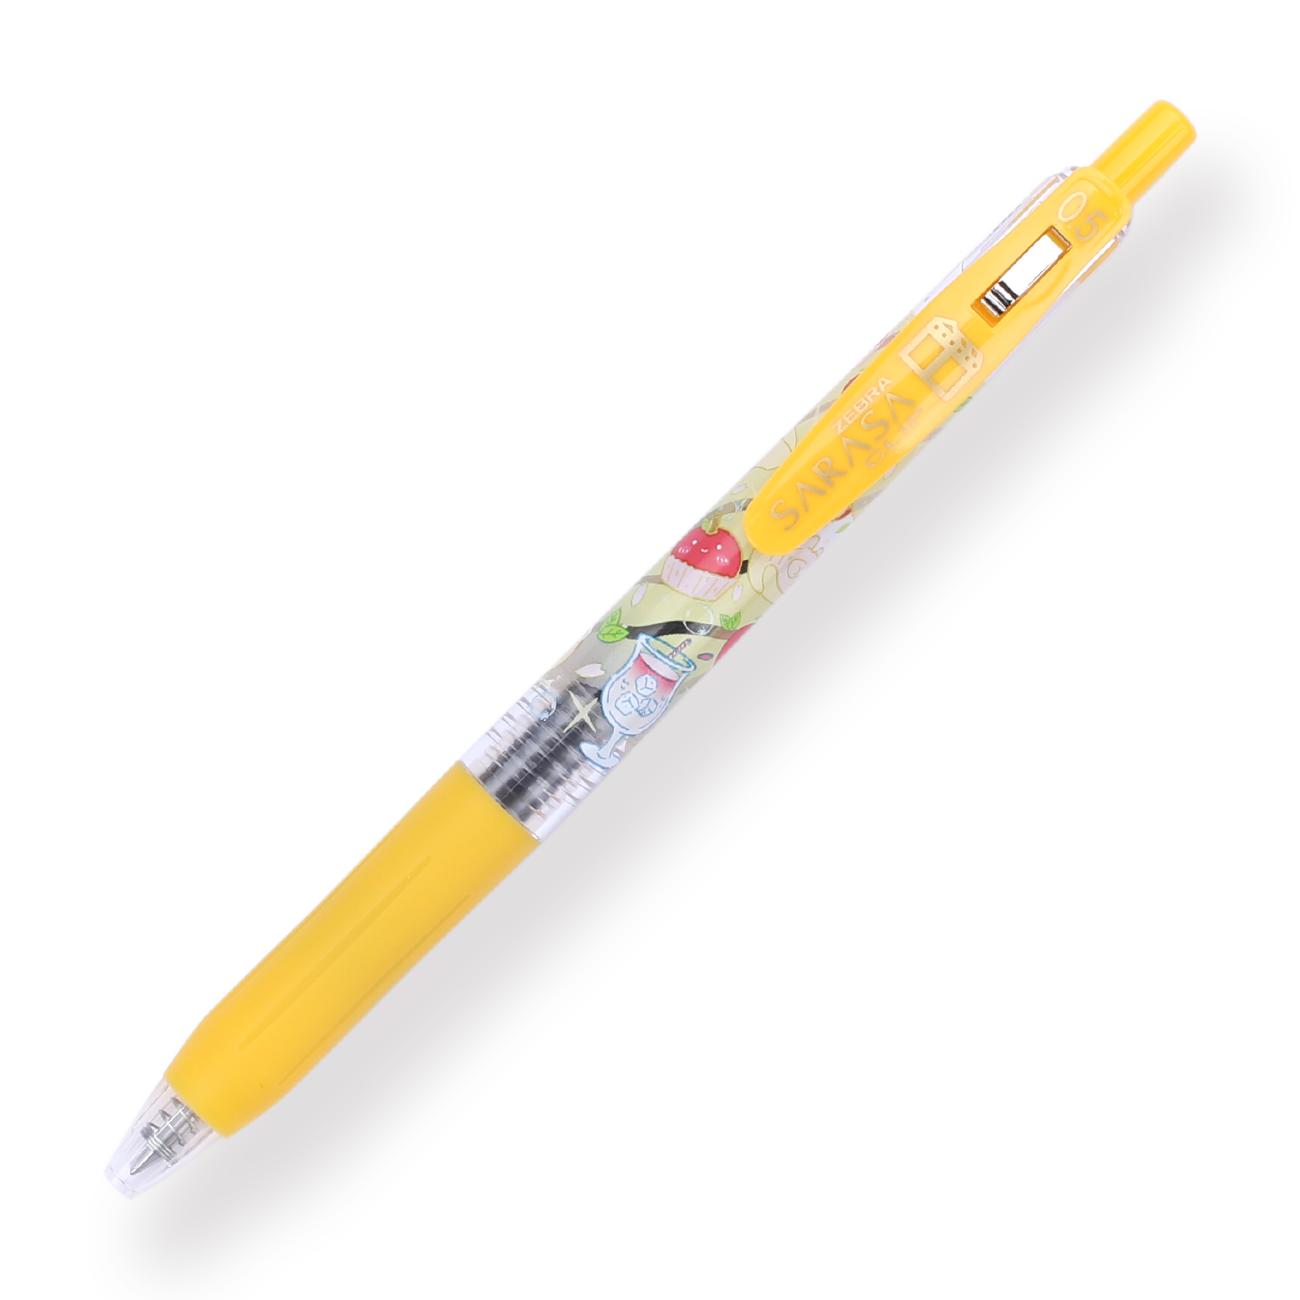 Zebra Sarasa Clip Limited Edition Gel Pen - 0.5 mm - Western Confectionery Series - Yellow Body - Stationery Pal